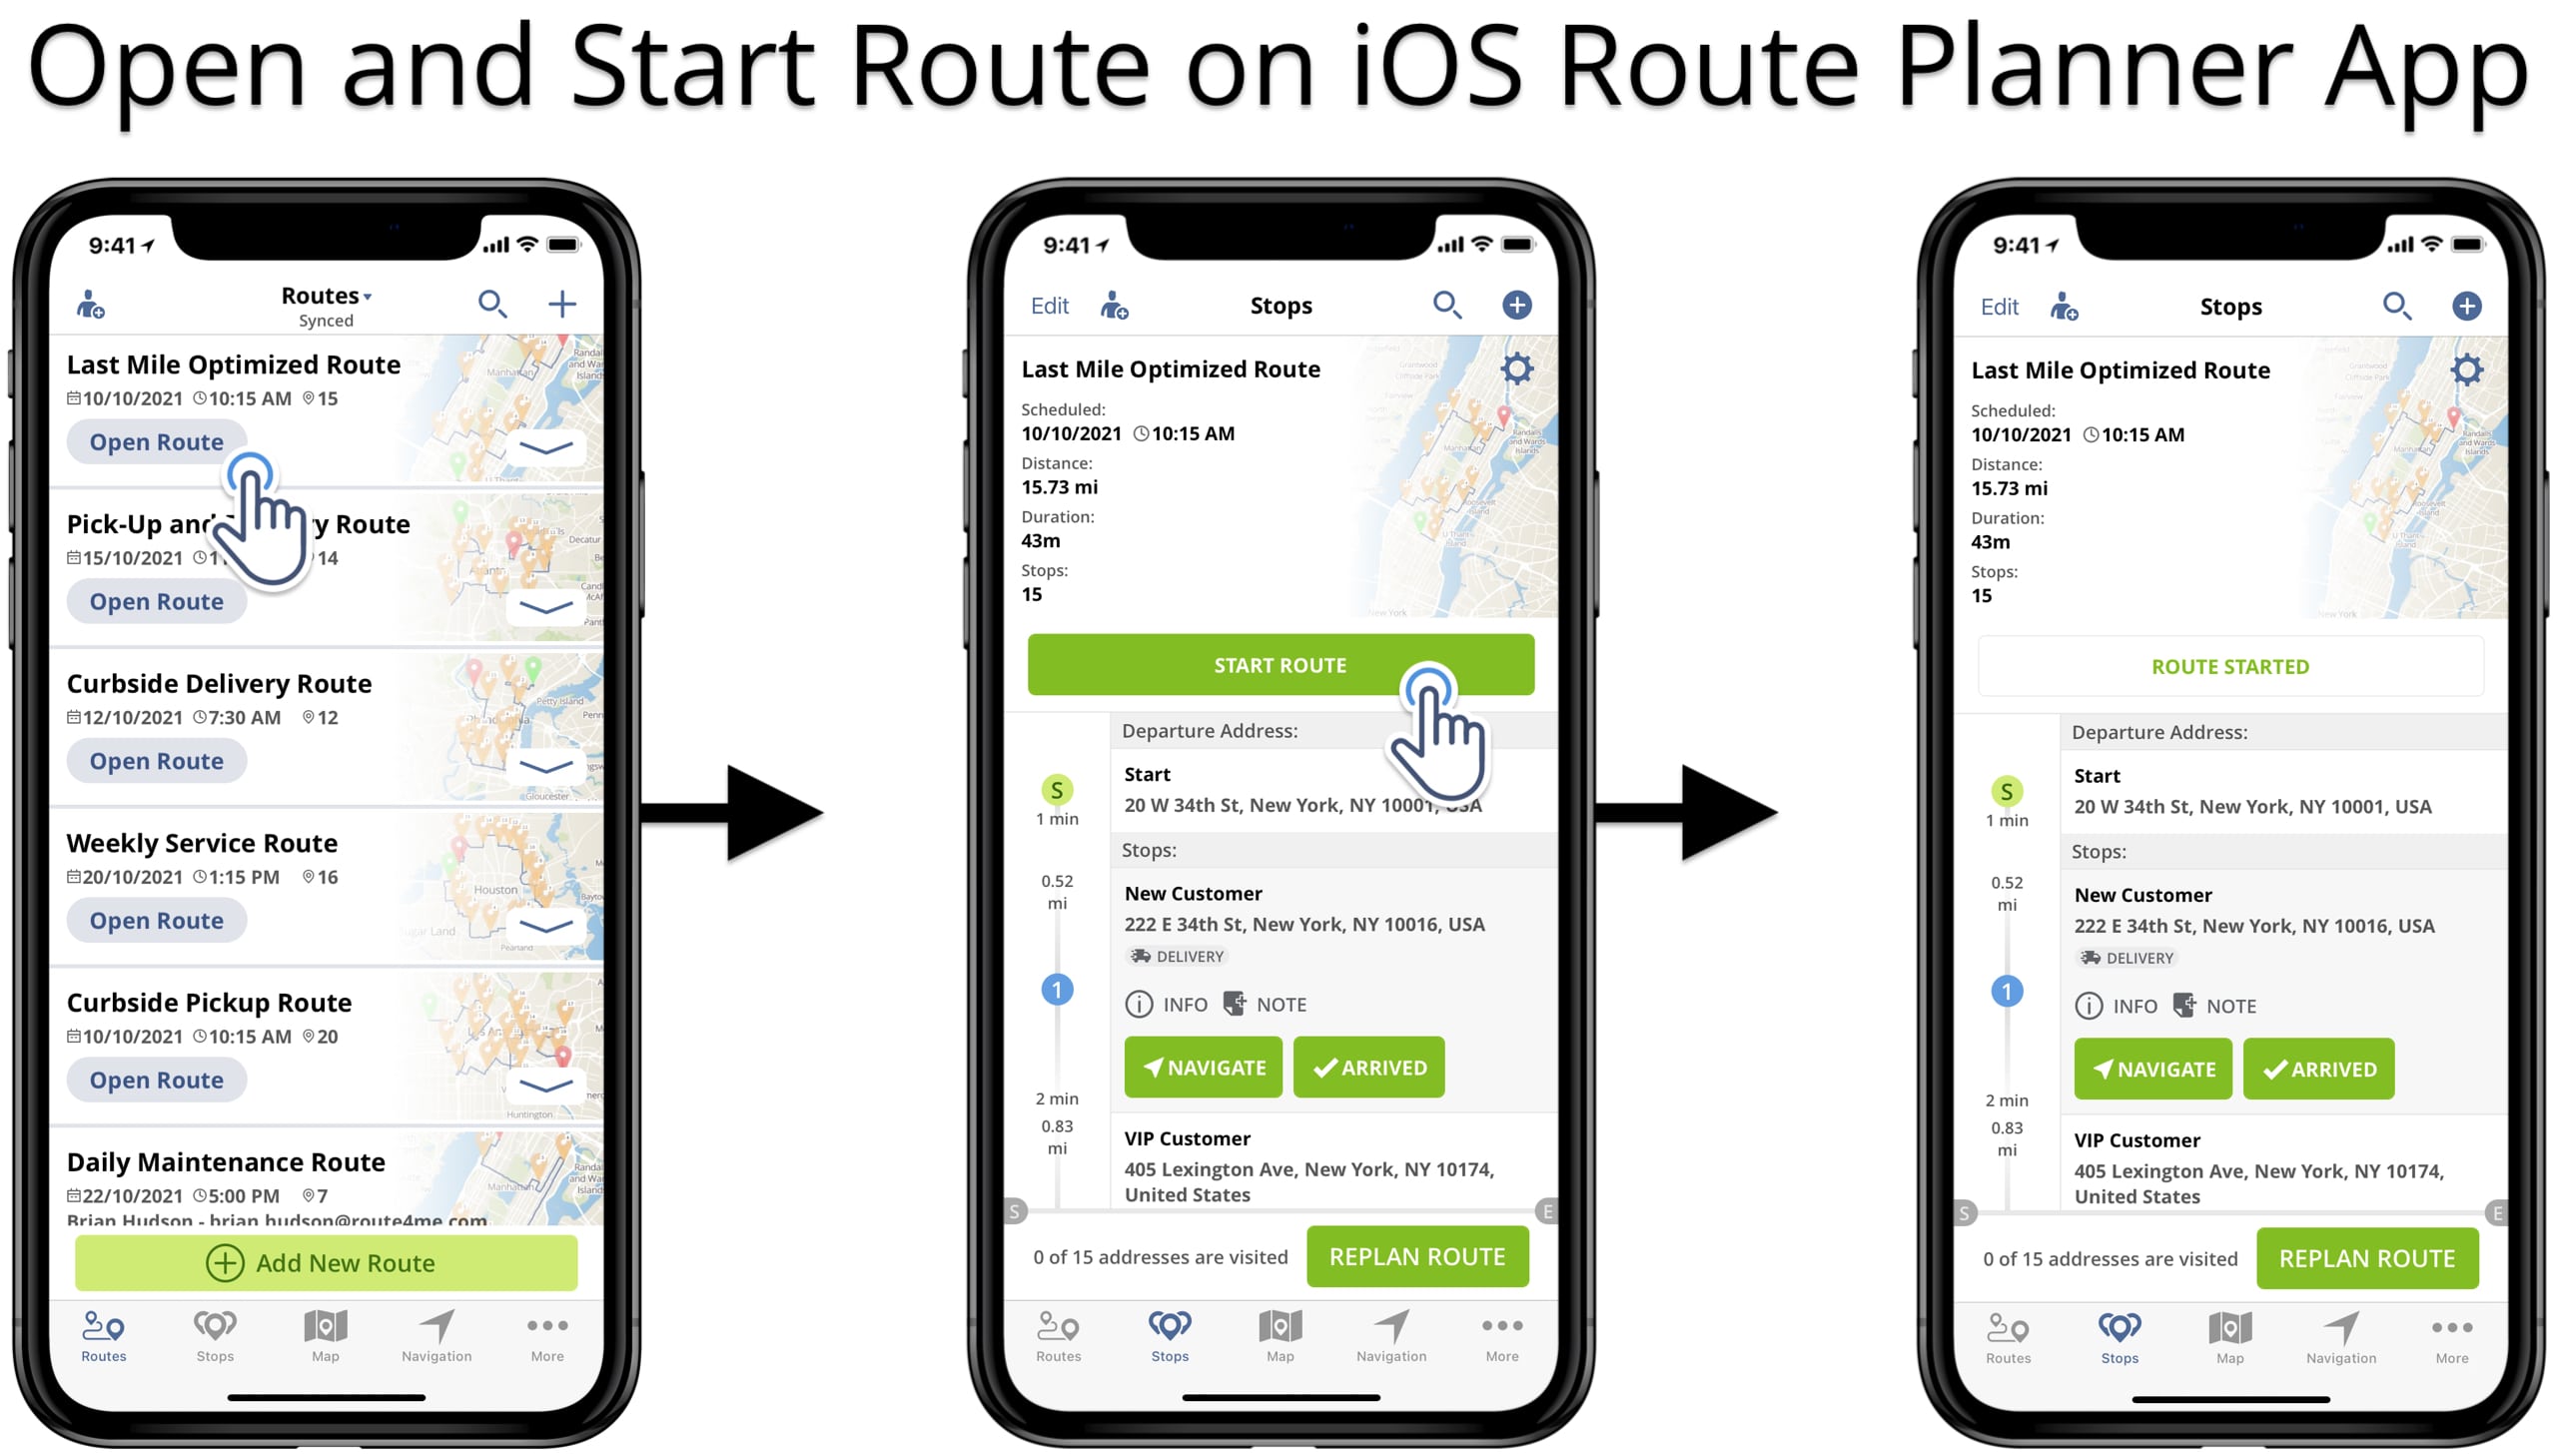 Start a planned and scheduled last-mile route on the iOS Route Planner app with POD collection.